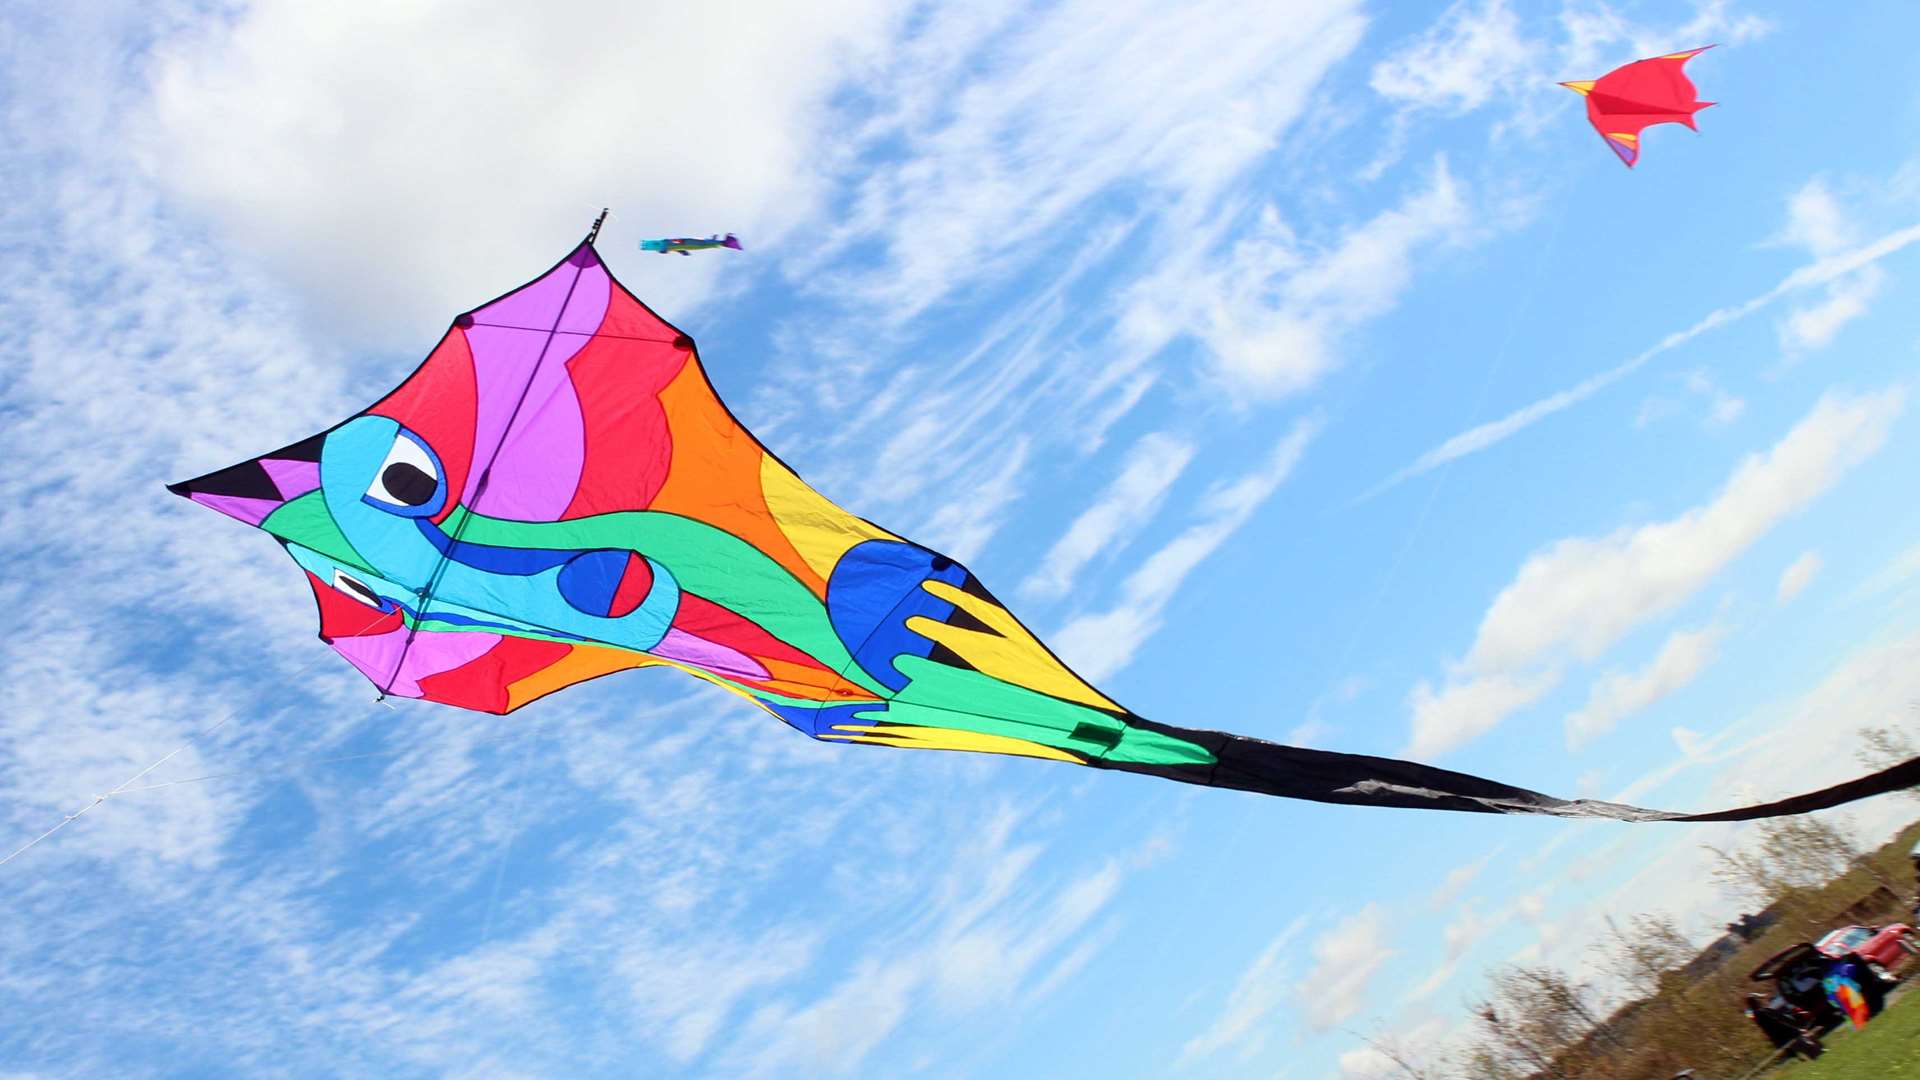 Fly your kite as high in the sky at Sellindge this weekend.